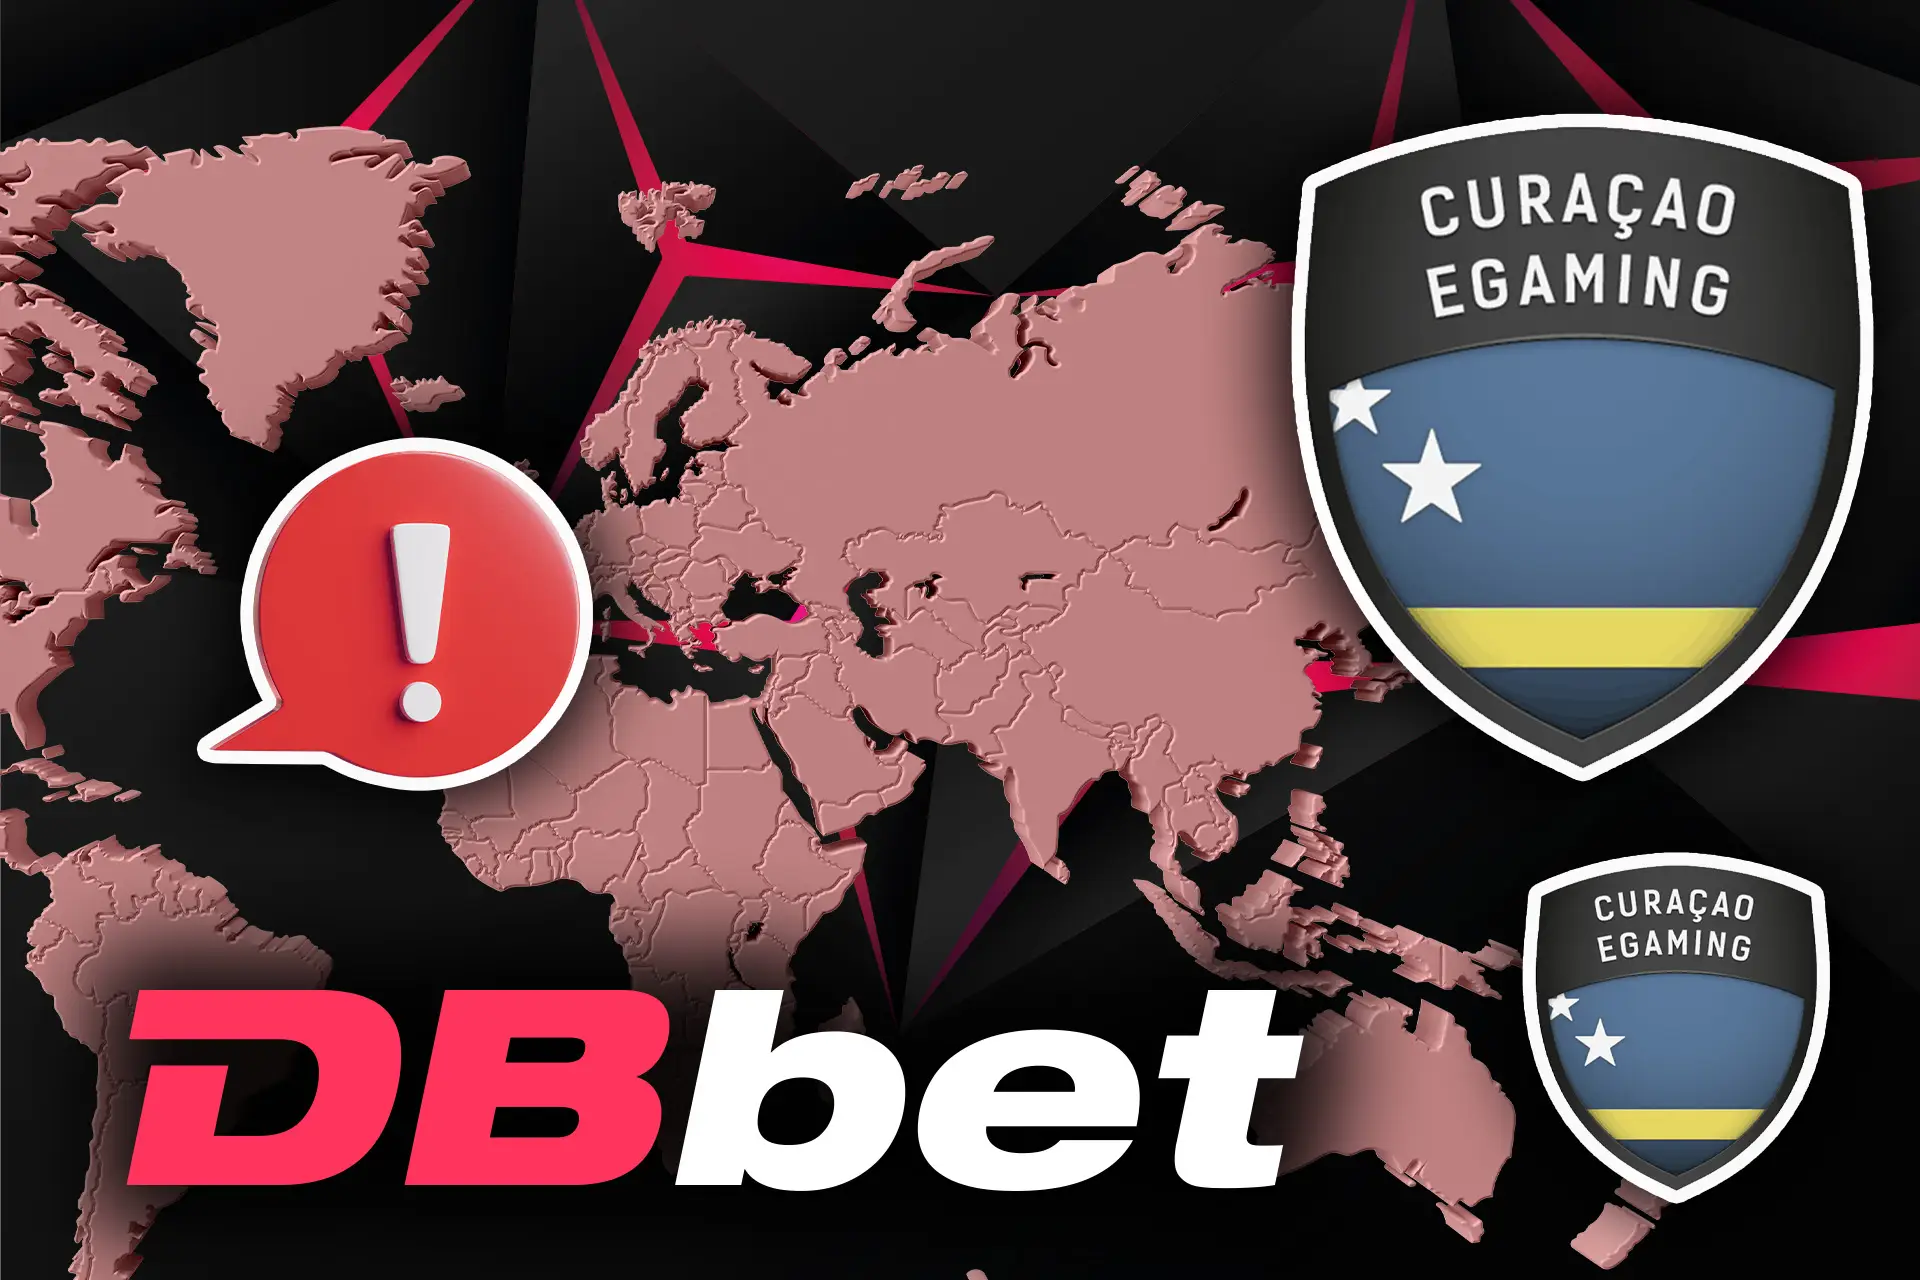 DBbet is not available in some regions, according to the license.